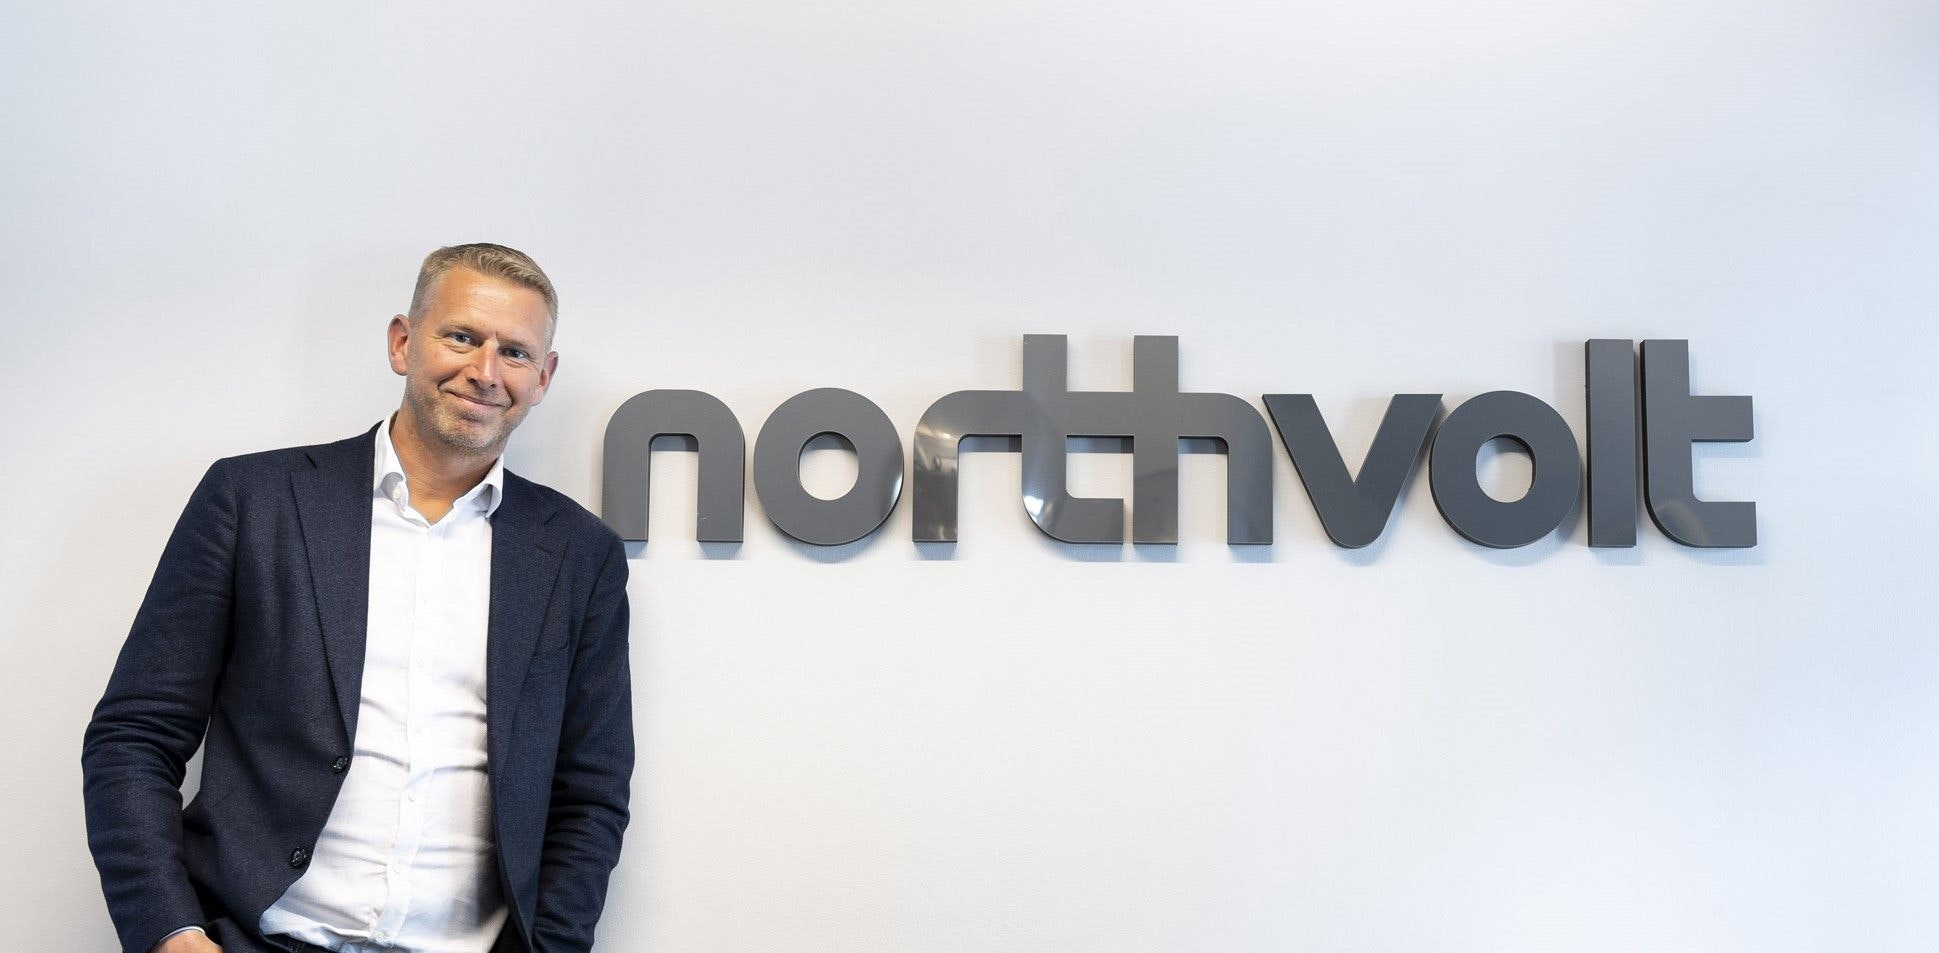 Peter Carlsson, founder and CEO of Northvolt.